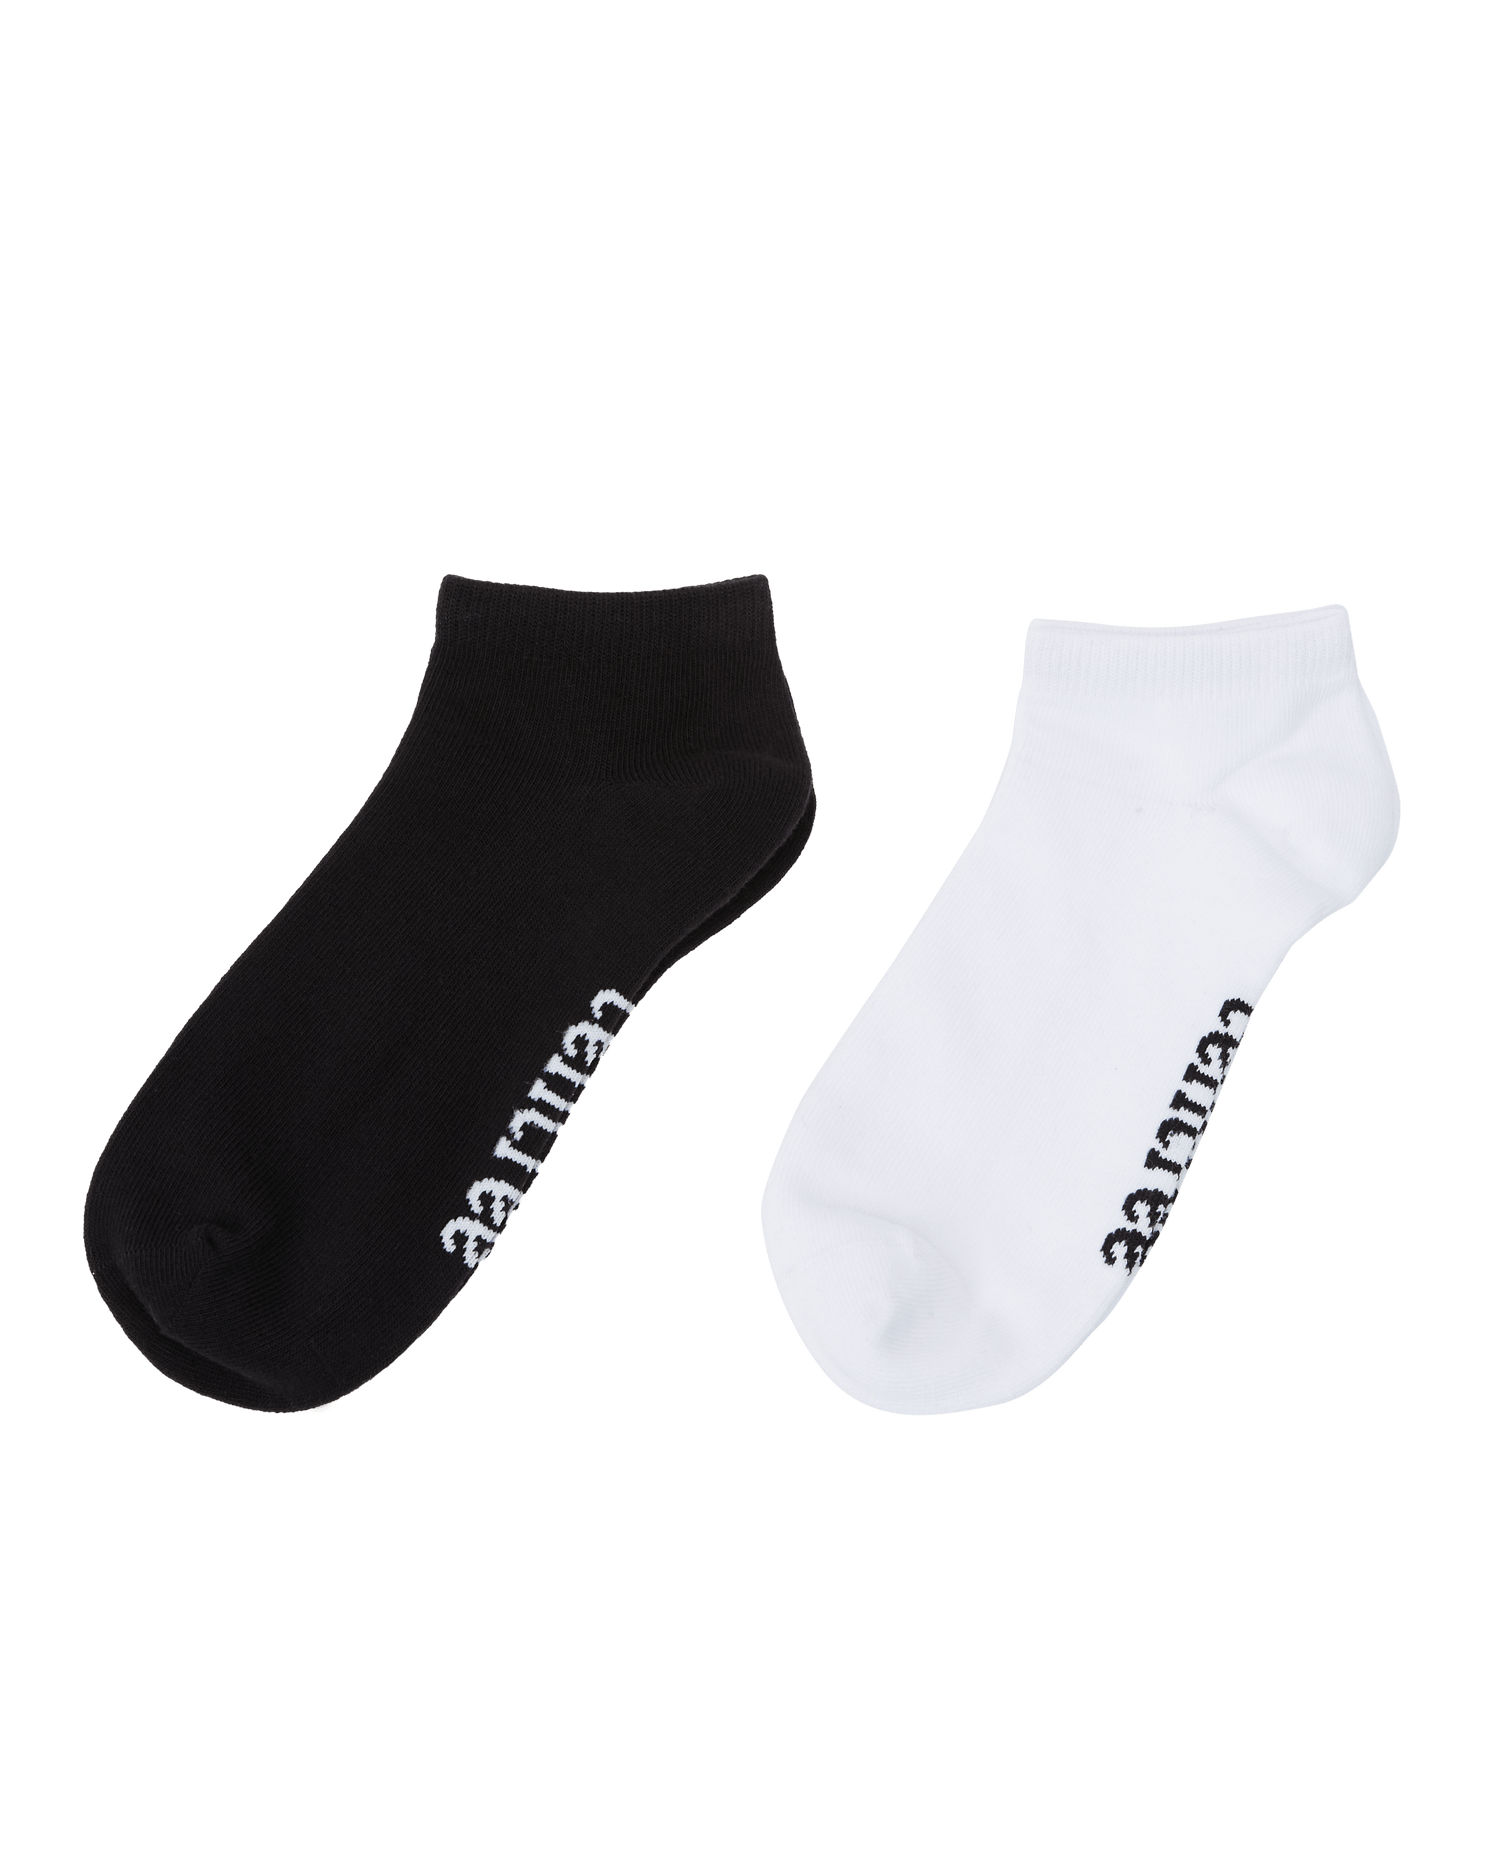 Tentree - Ankle Socks 2PK - Organic Cotton & Recycled Polyester - Weekendbee - sustainable sportswear